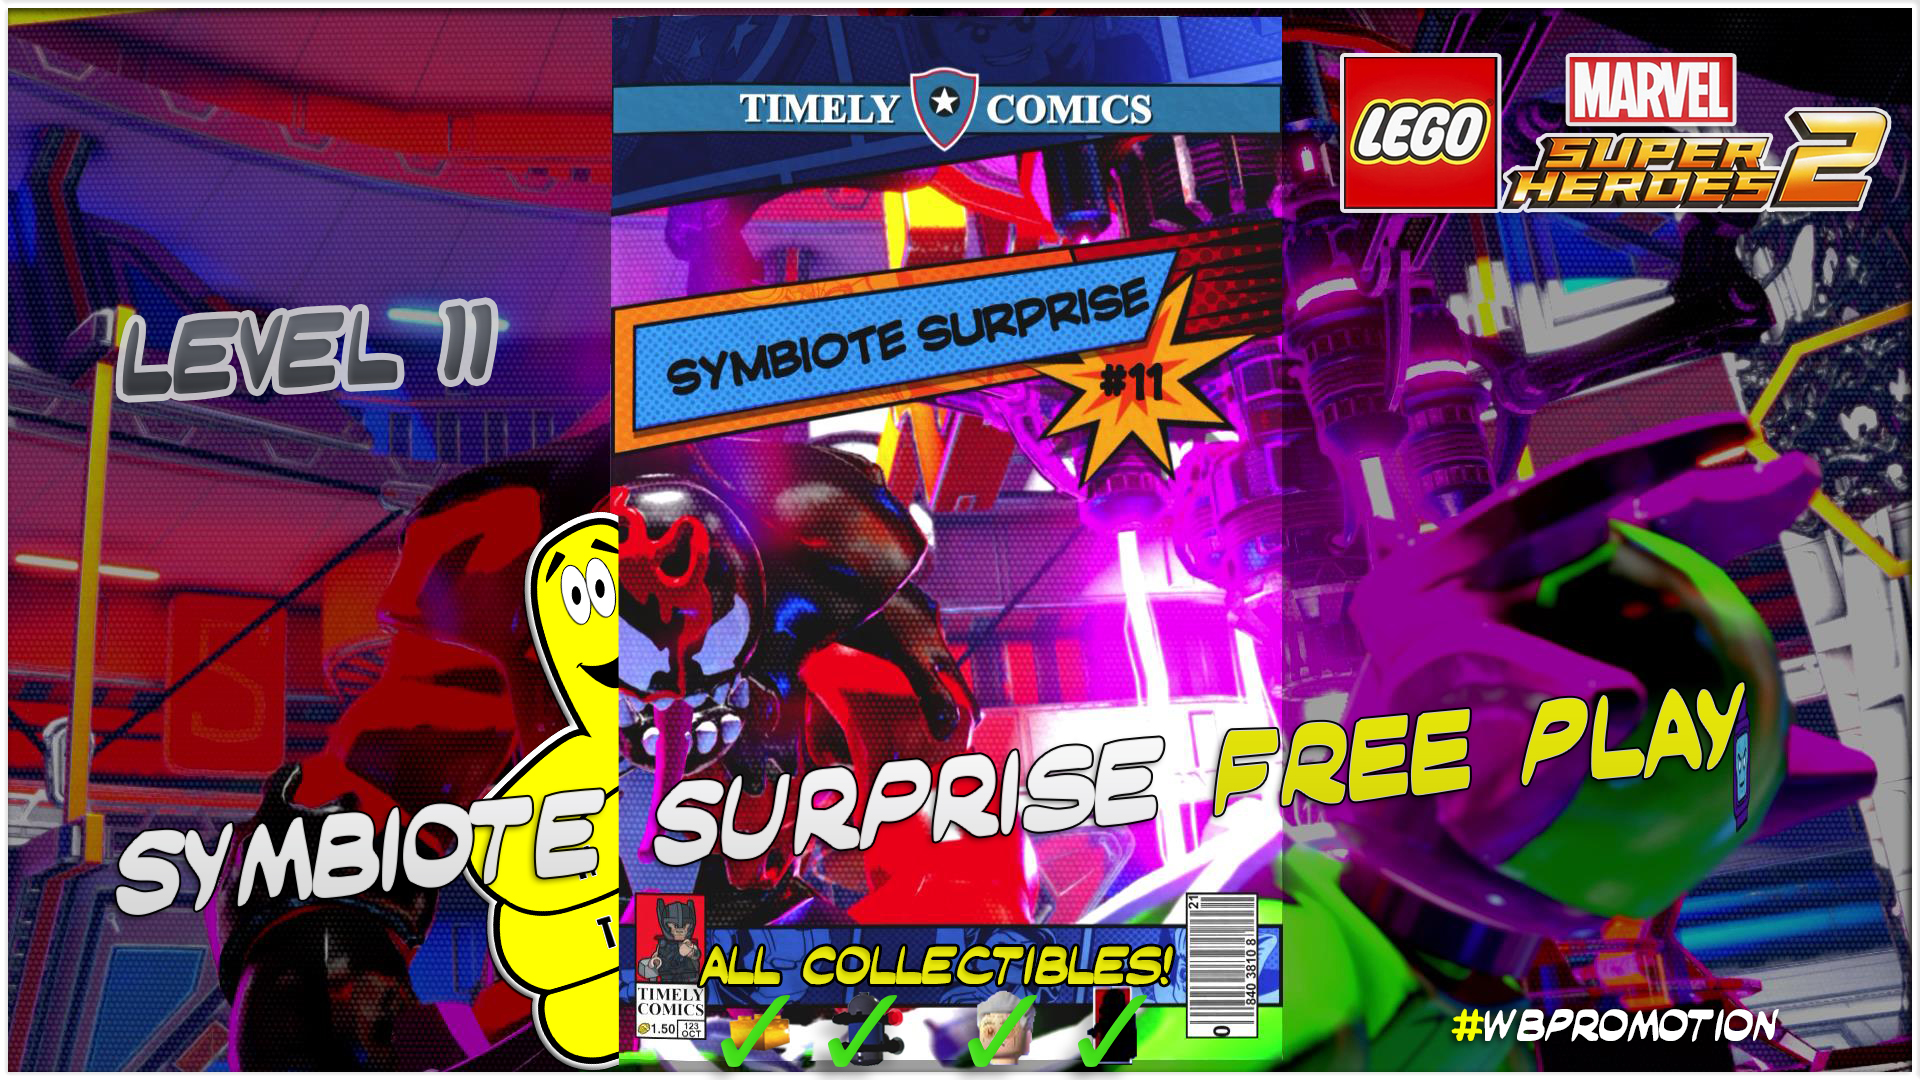 Lego Marvel Superheroes 2: Level 11 / Symbiote Surprise FREE PLAY (All Collectibles) – HTG